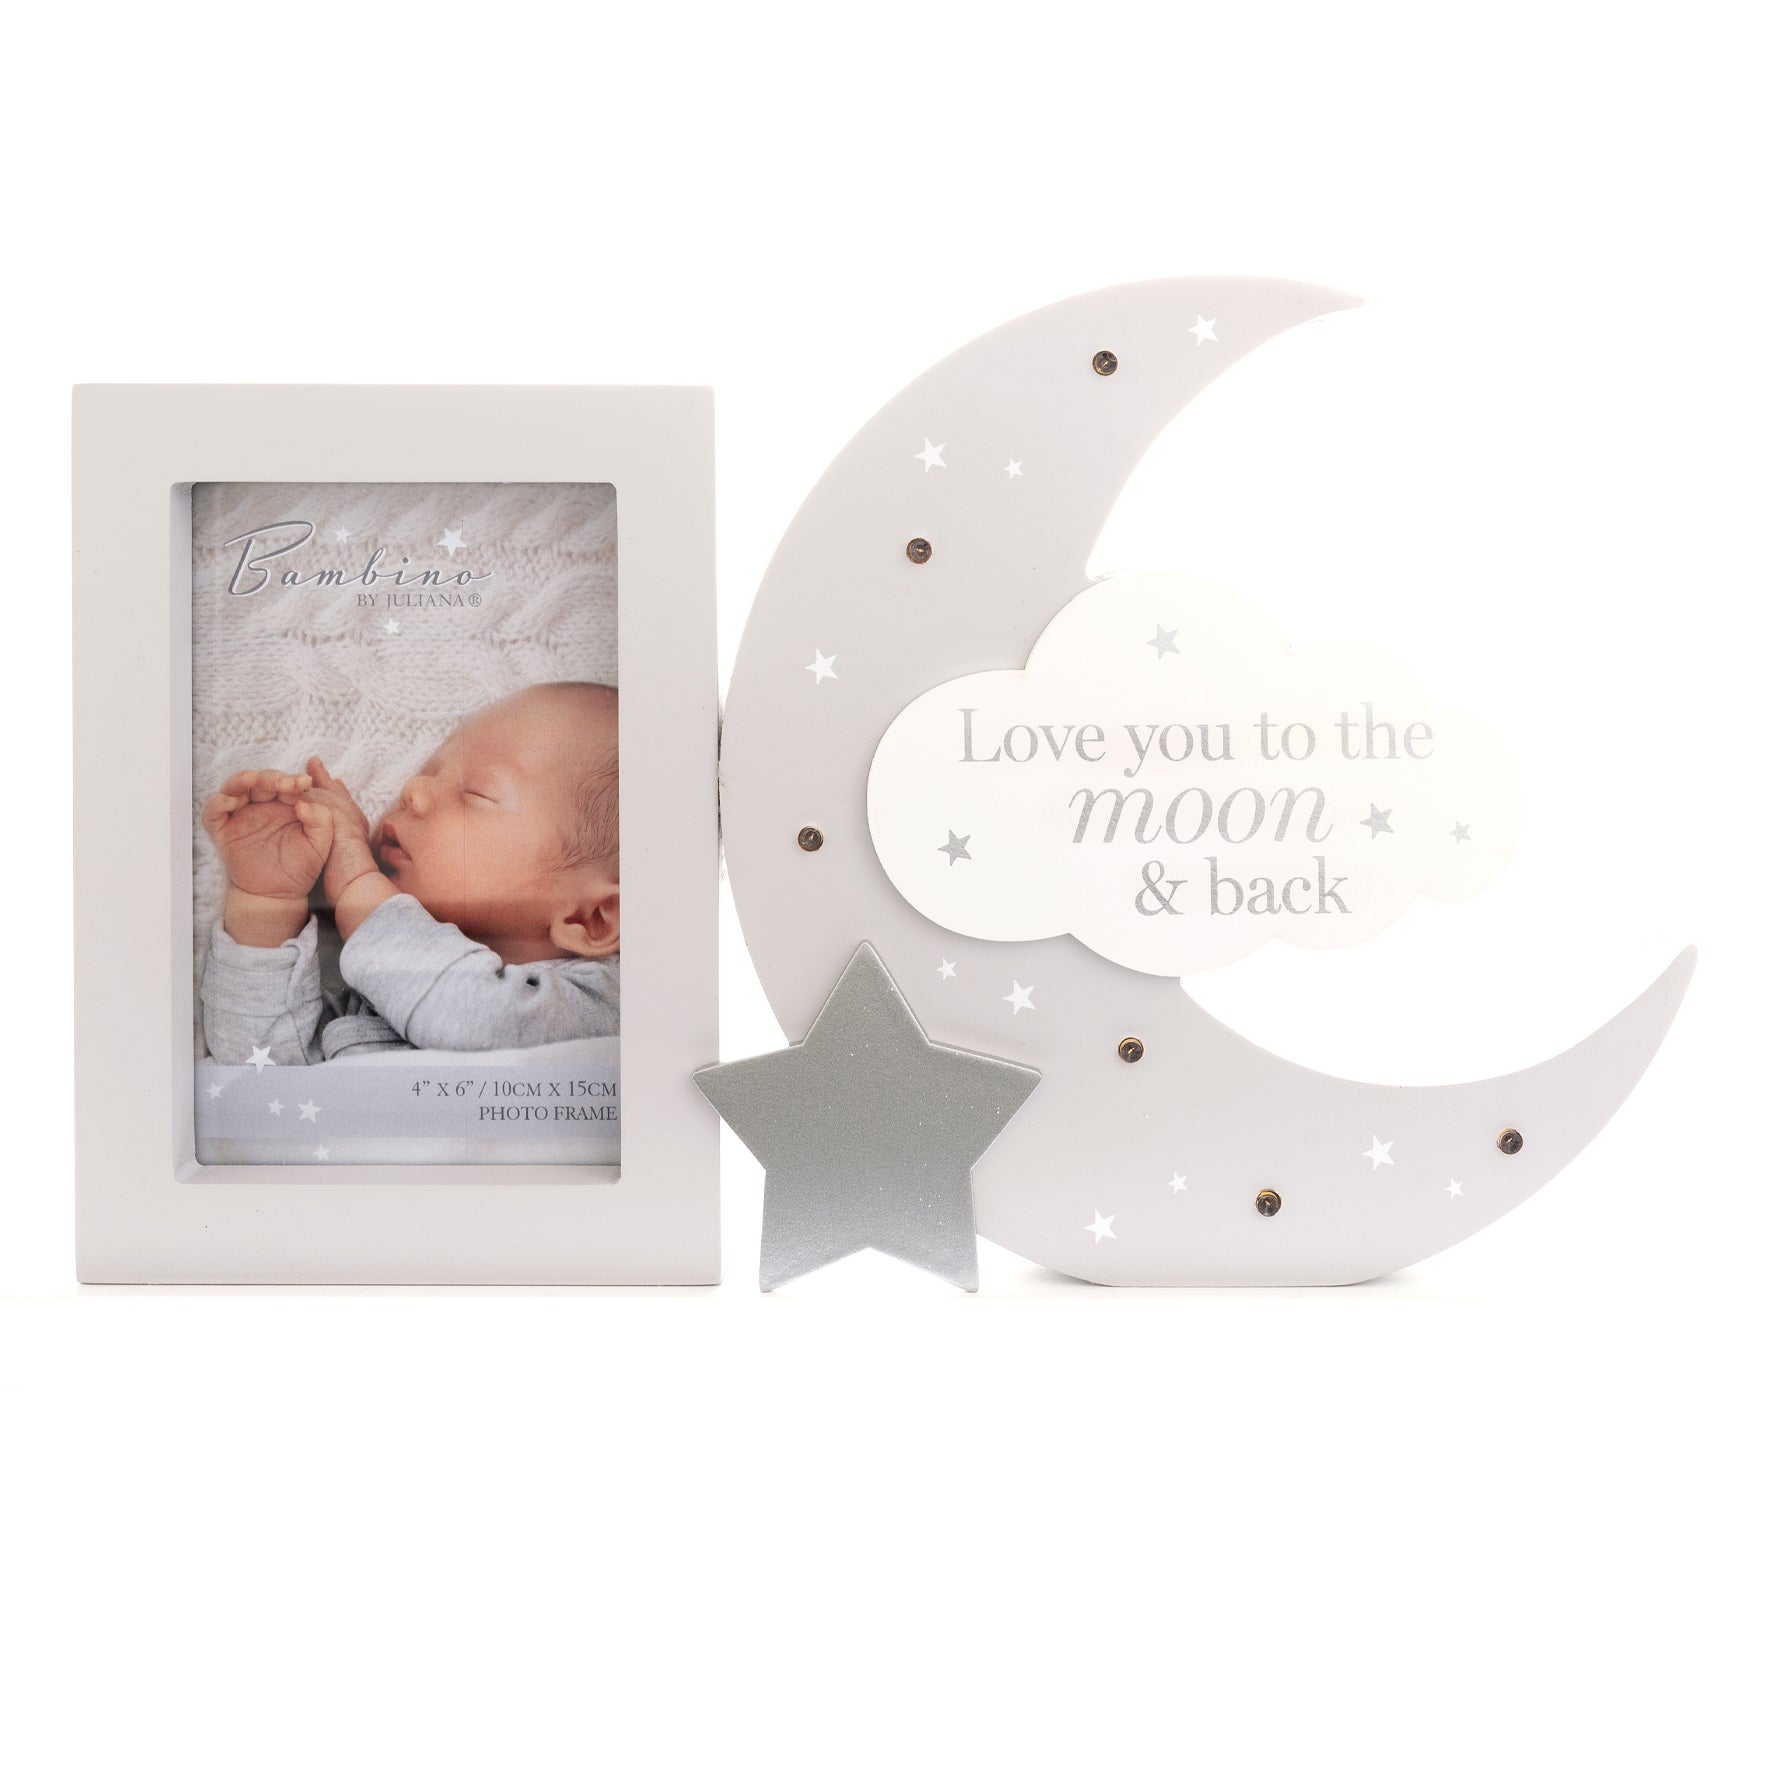 Bambino Light Up Mantel Plaque Frame &quot;Love You to the Moon&quot;